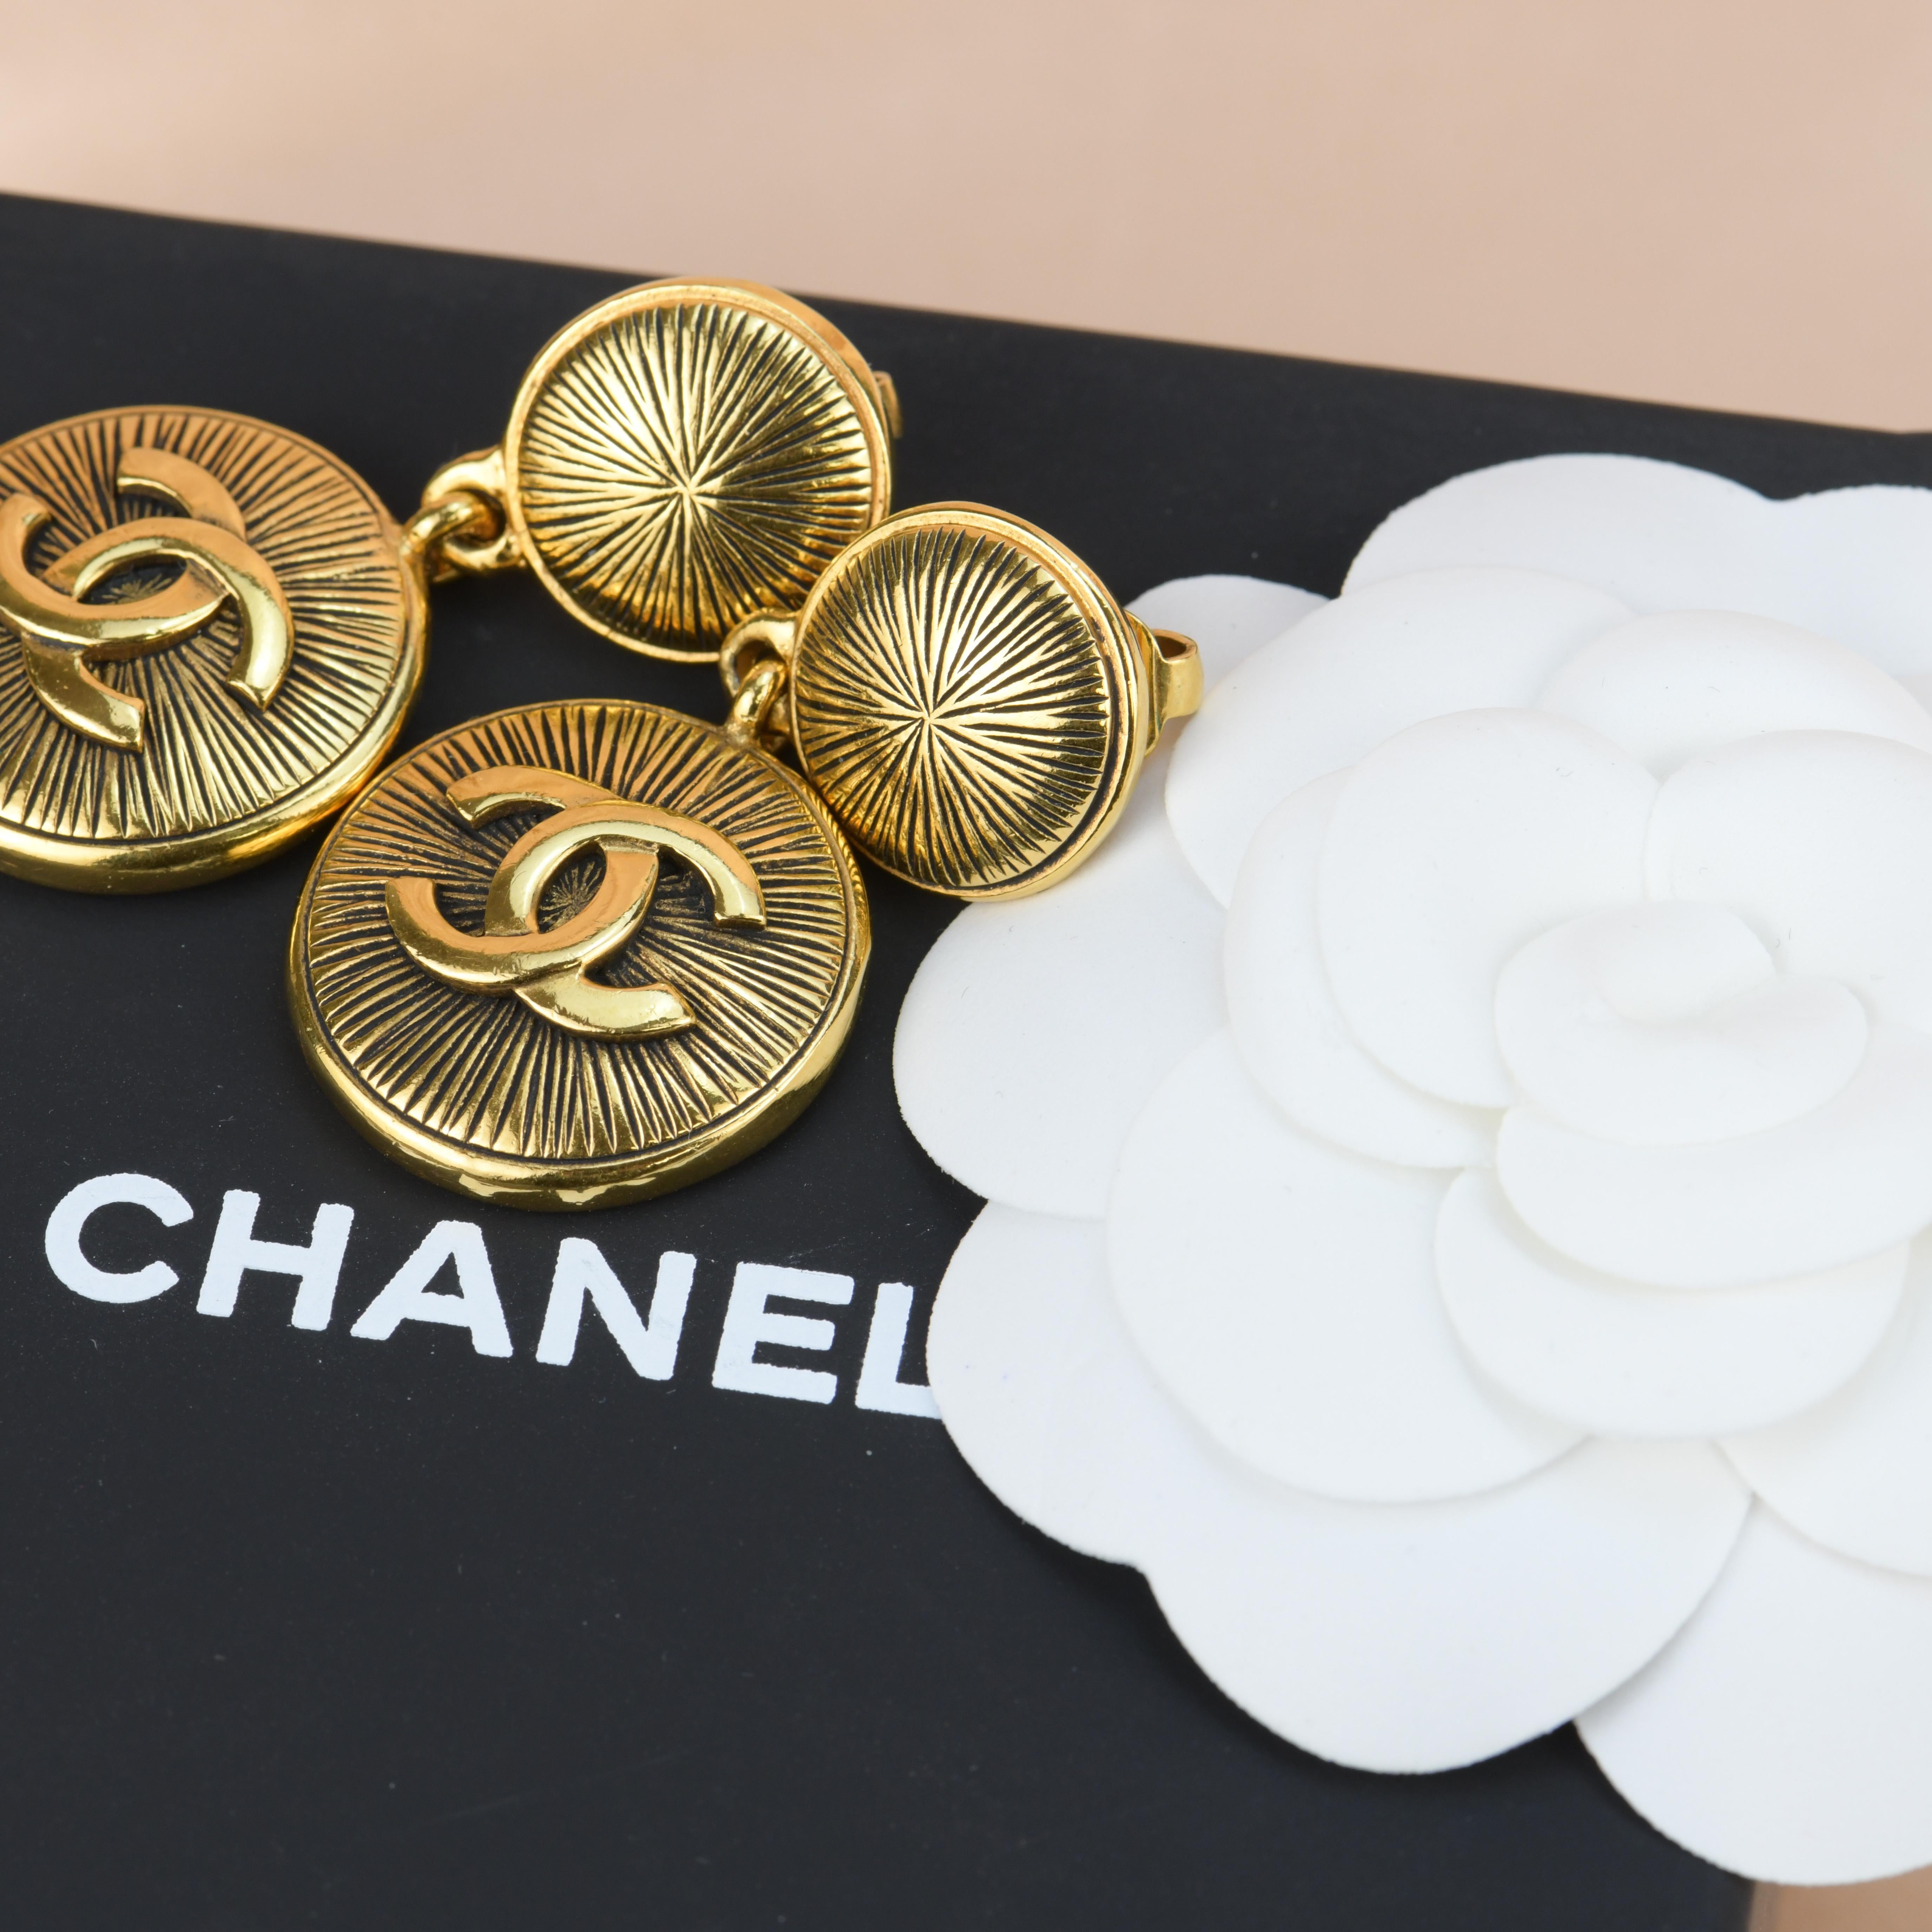 Brand: Chanel 
Period: Approx. 1990-1992
Model: Clip-On Earring
__________________________________
Metal: Gold Plated
Measurement: Approx. 5cm L *2.6cm W
Weight: 30g
__________________________________
Condition Excellent 
Comes with Chanel Box /